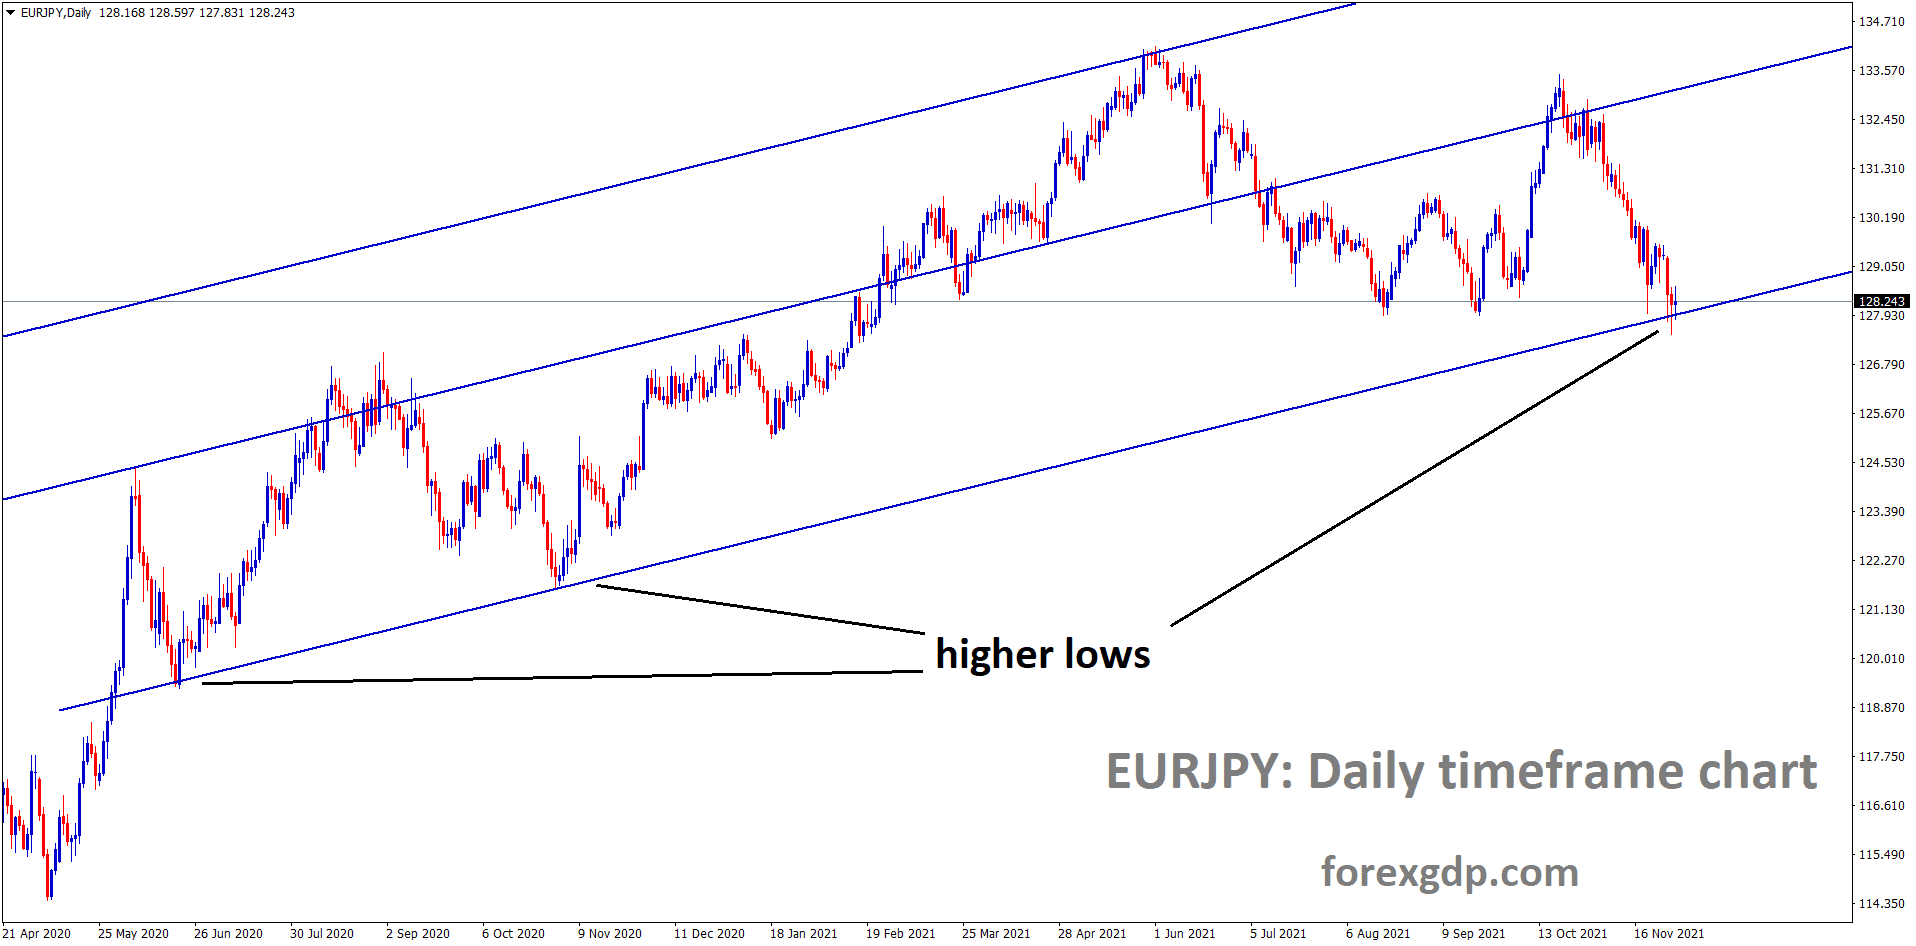 EURJPY is moving in an Ascending channel and reached the higher low area of the channel